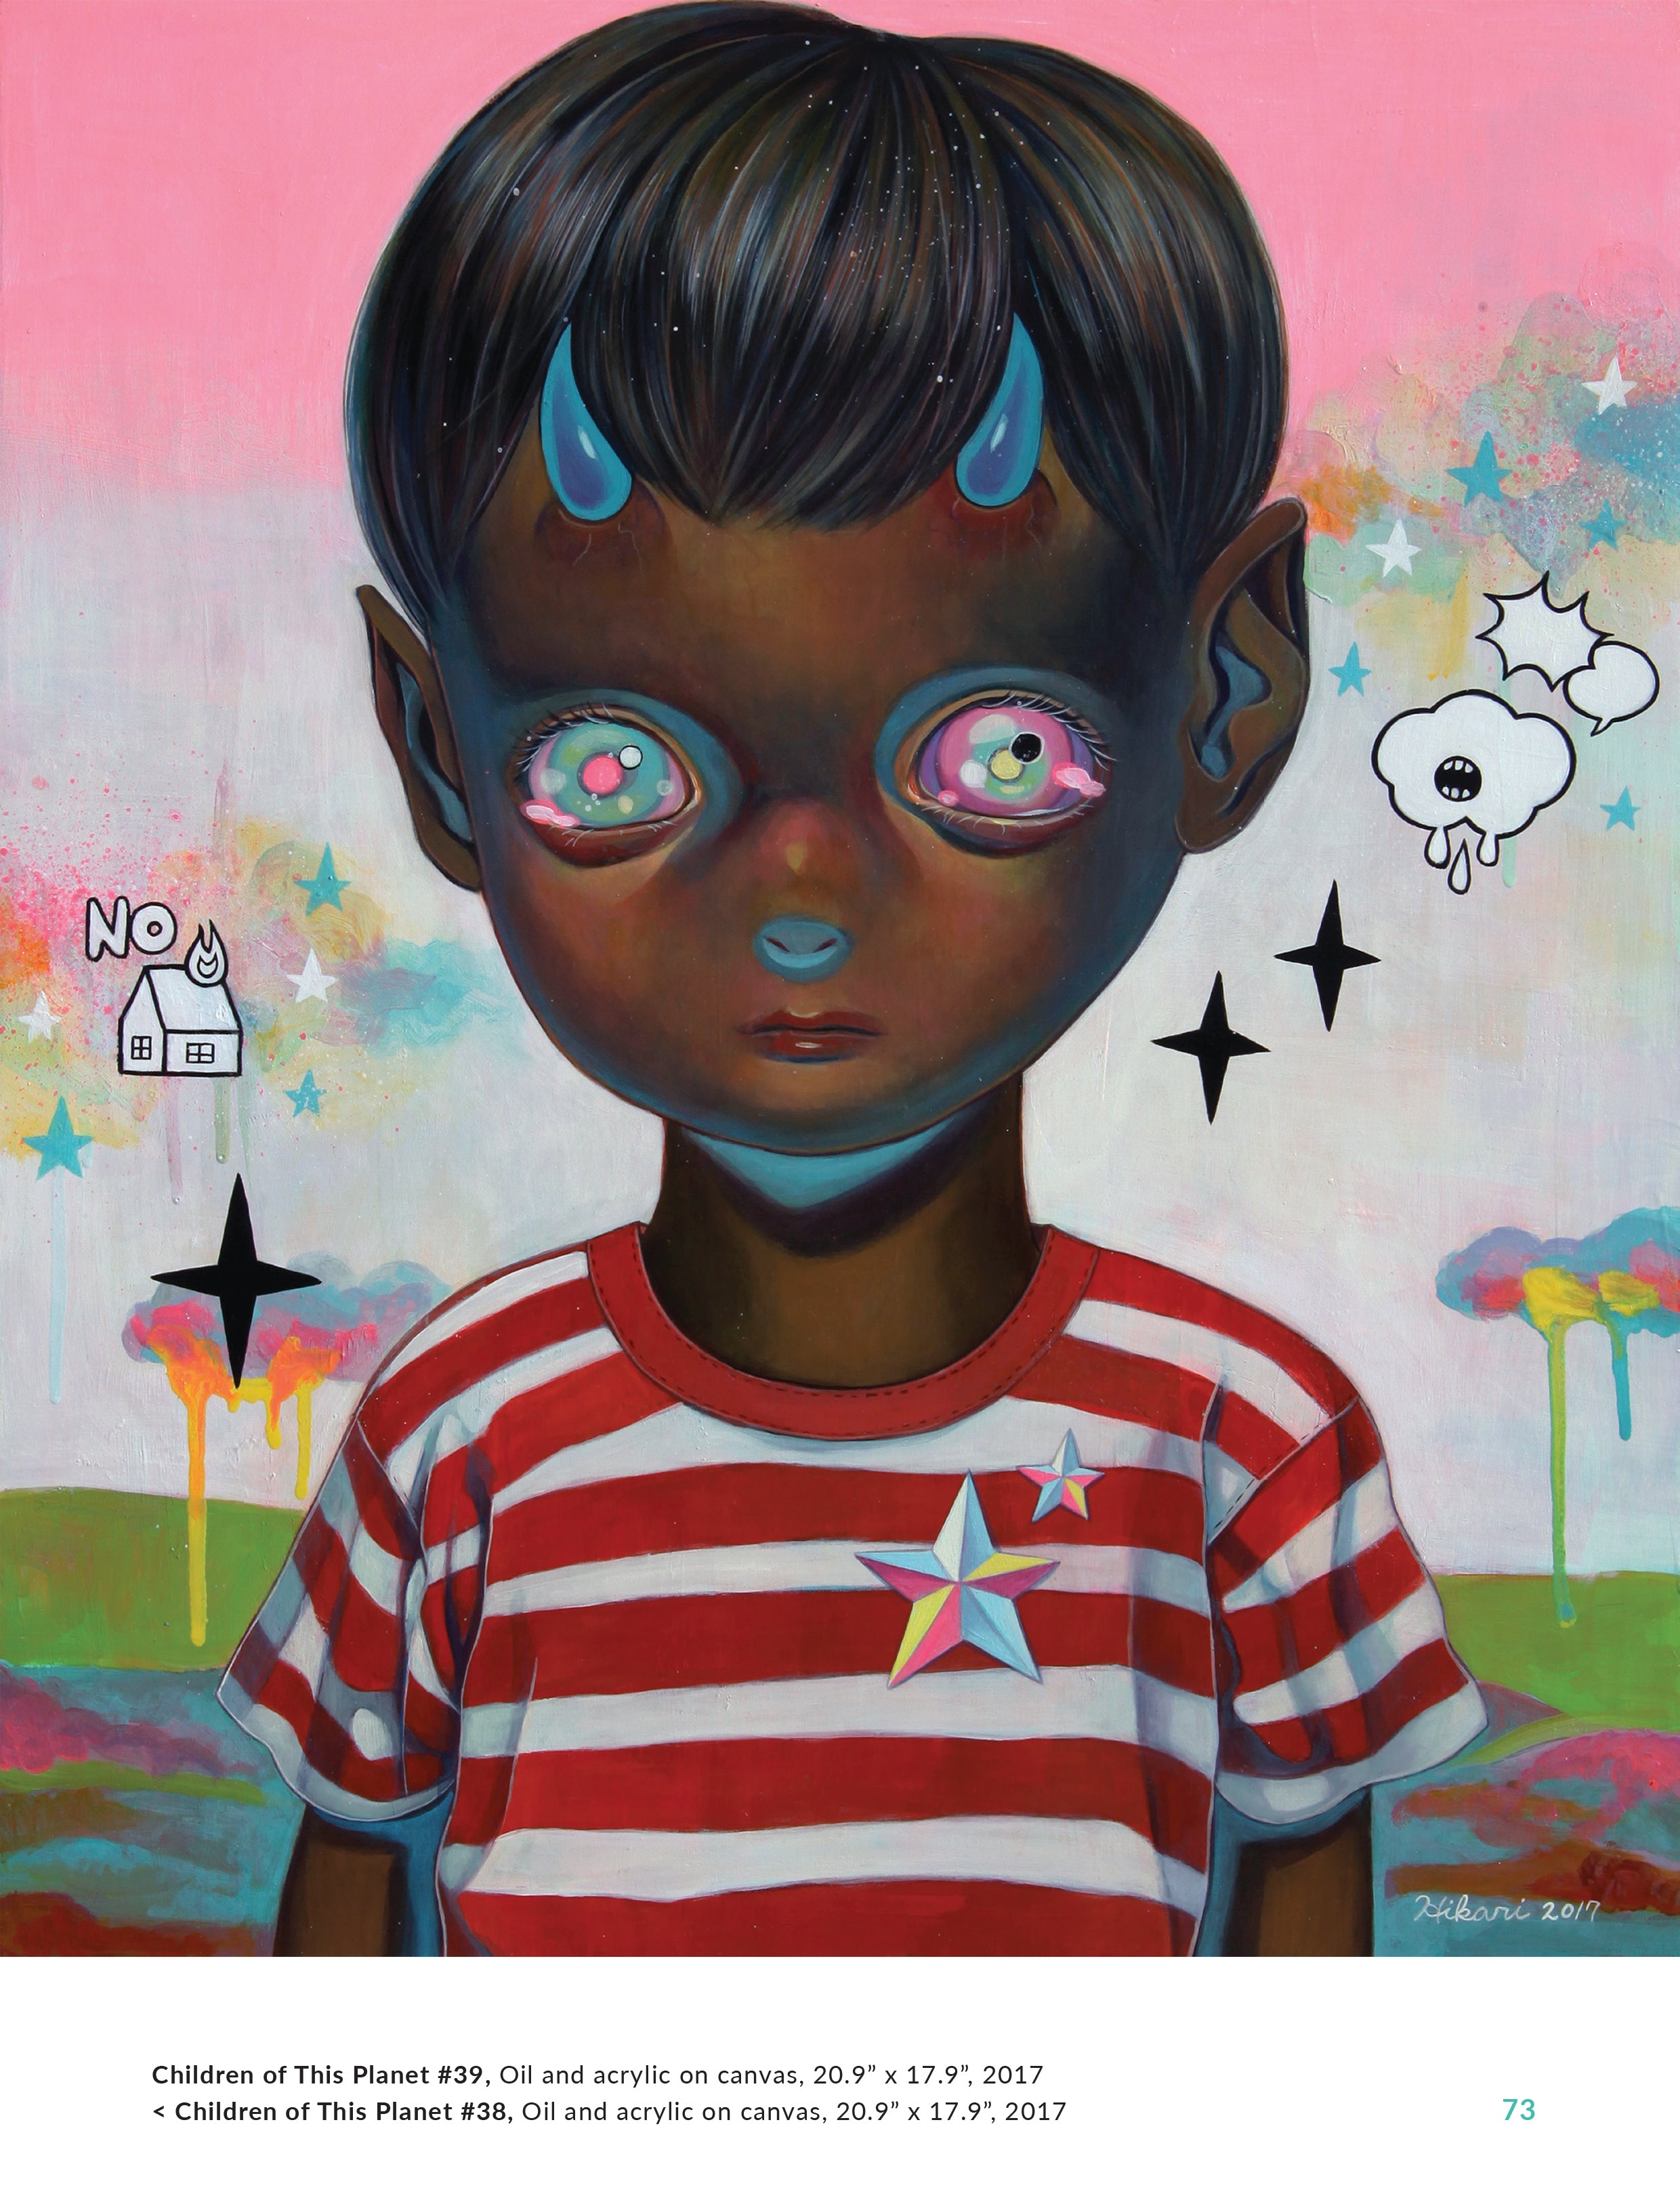 The art of Hikari Shimoda with unique drawing